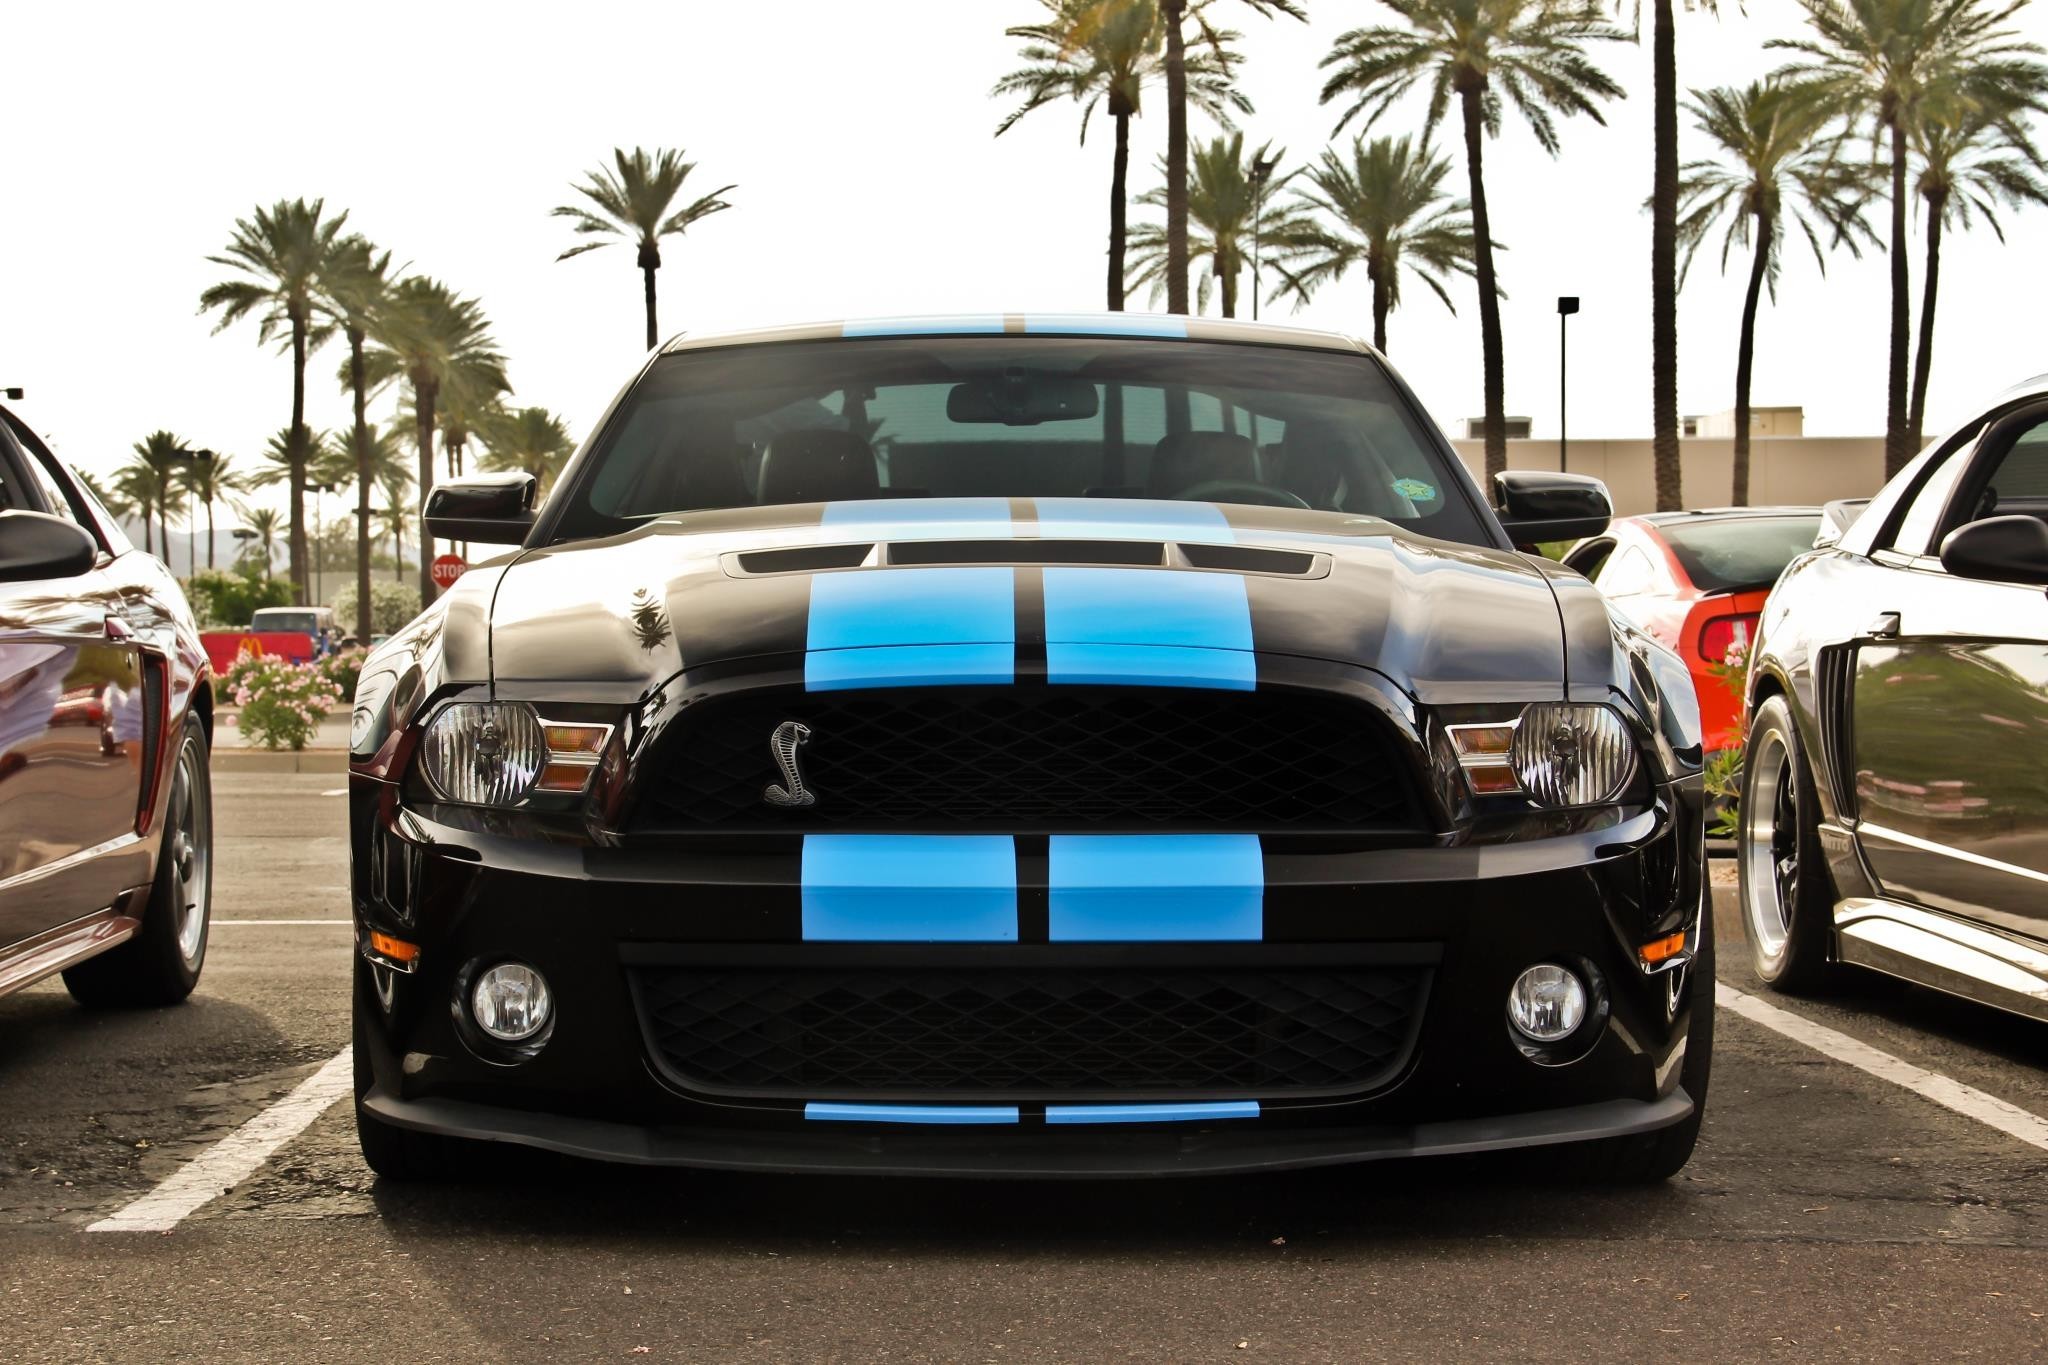 Ford Mustang, Muscle Cars, Blue Stripes, Black Paint, Shelby GT Wallpaper HD / Desktop and Mobile Background